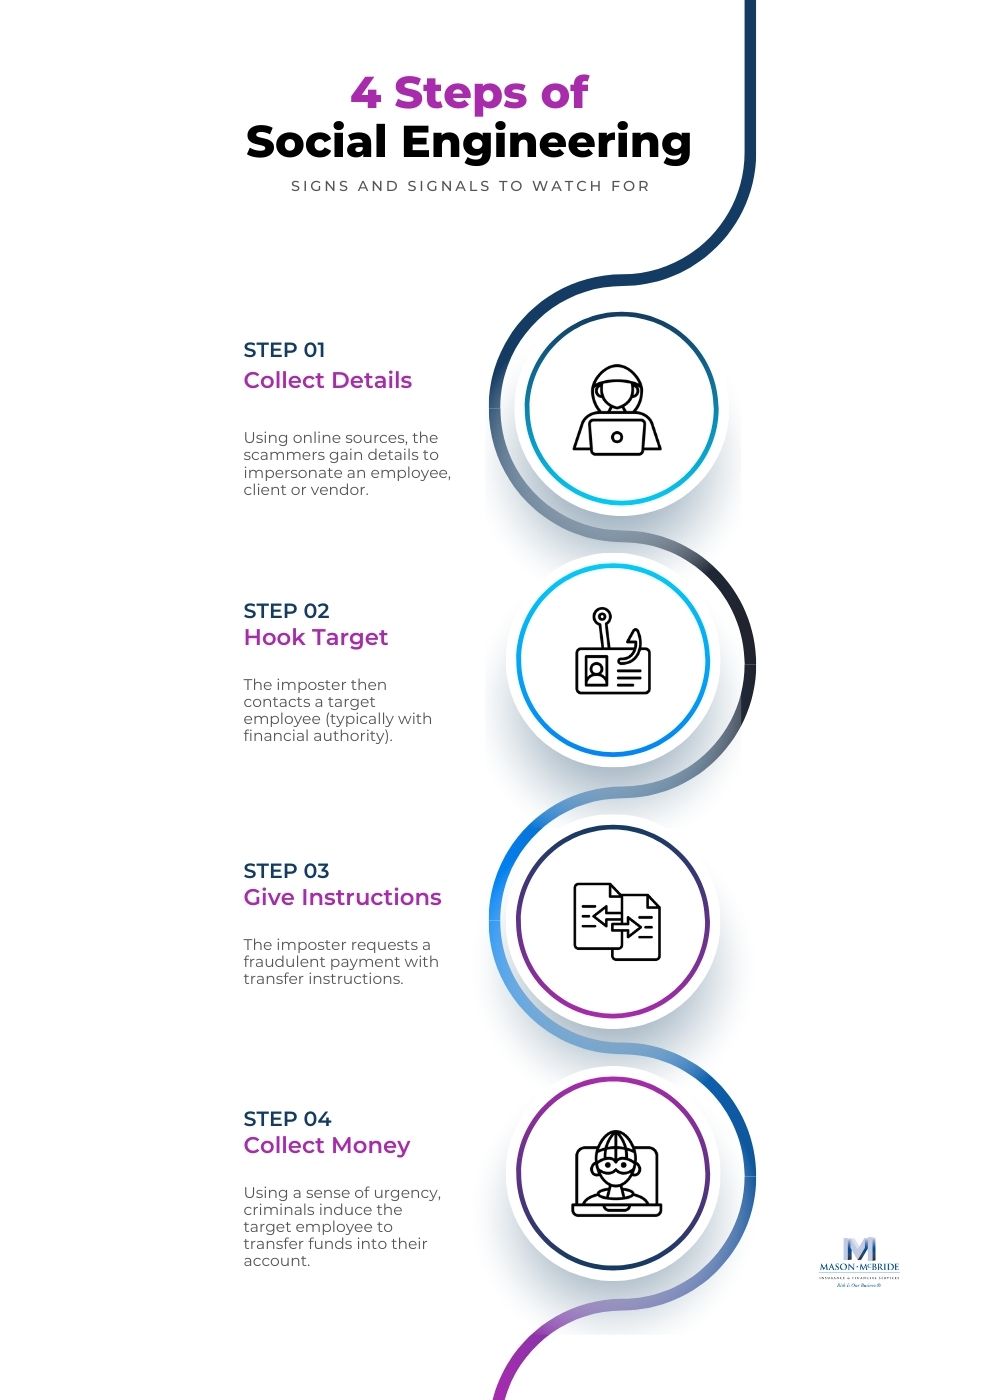 Steps of Social Engineering Infographic